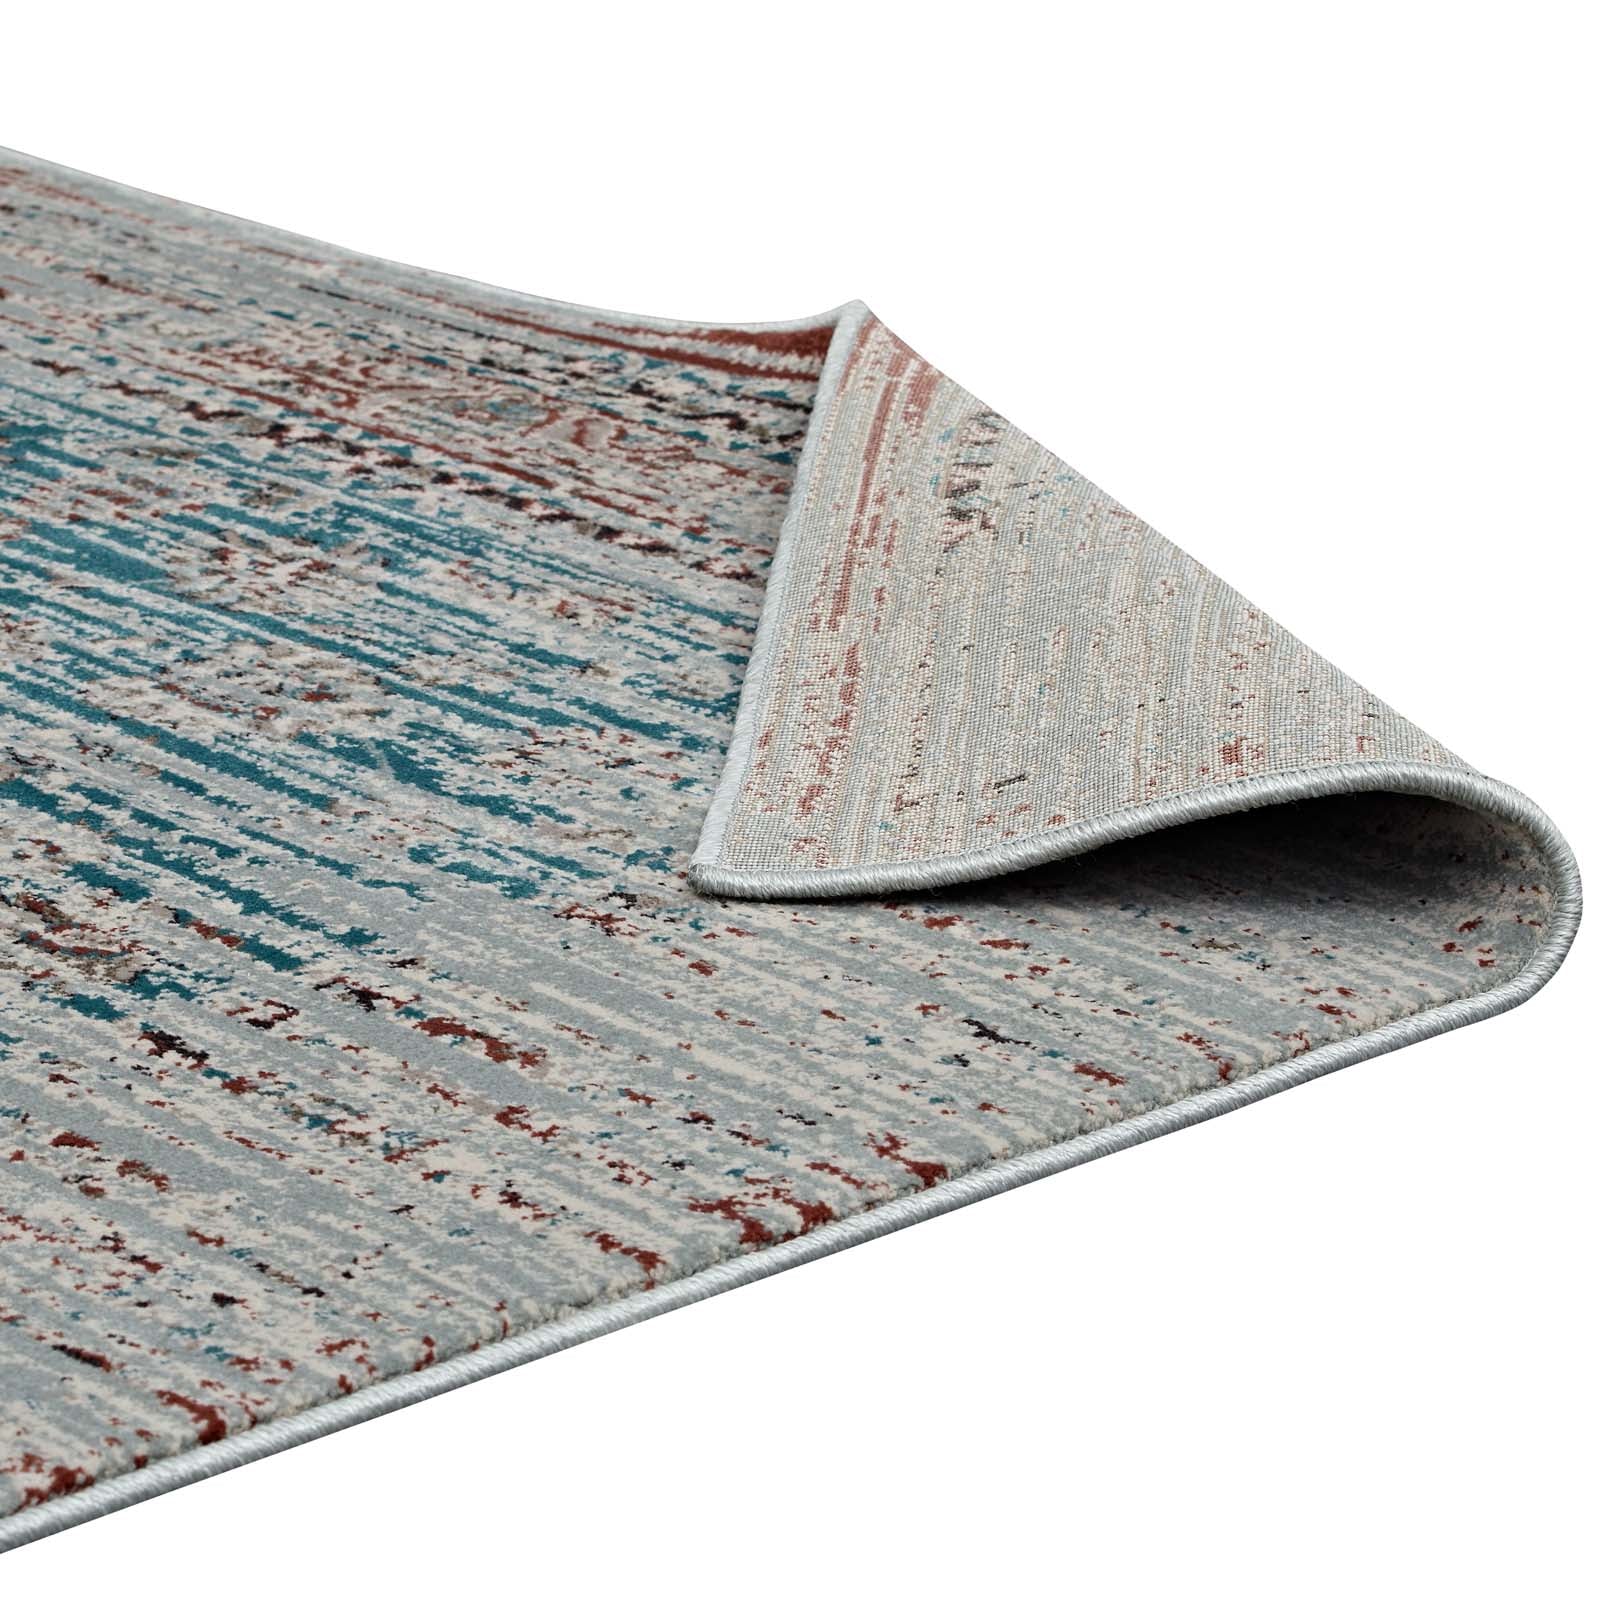 Hesper  Distressed Contemporary Floral Lattice Area Rug - East Shore Modern Home Furnishings